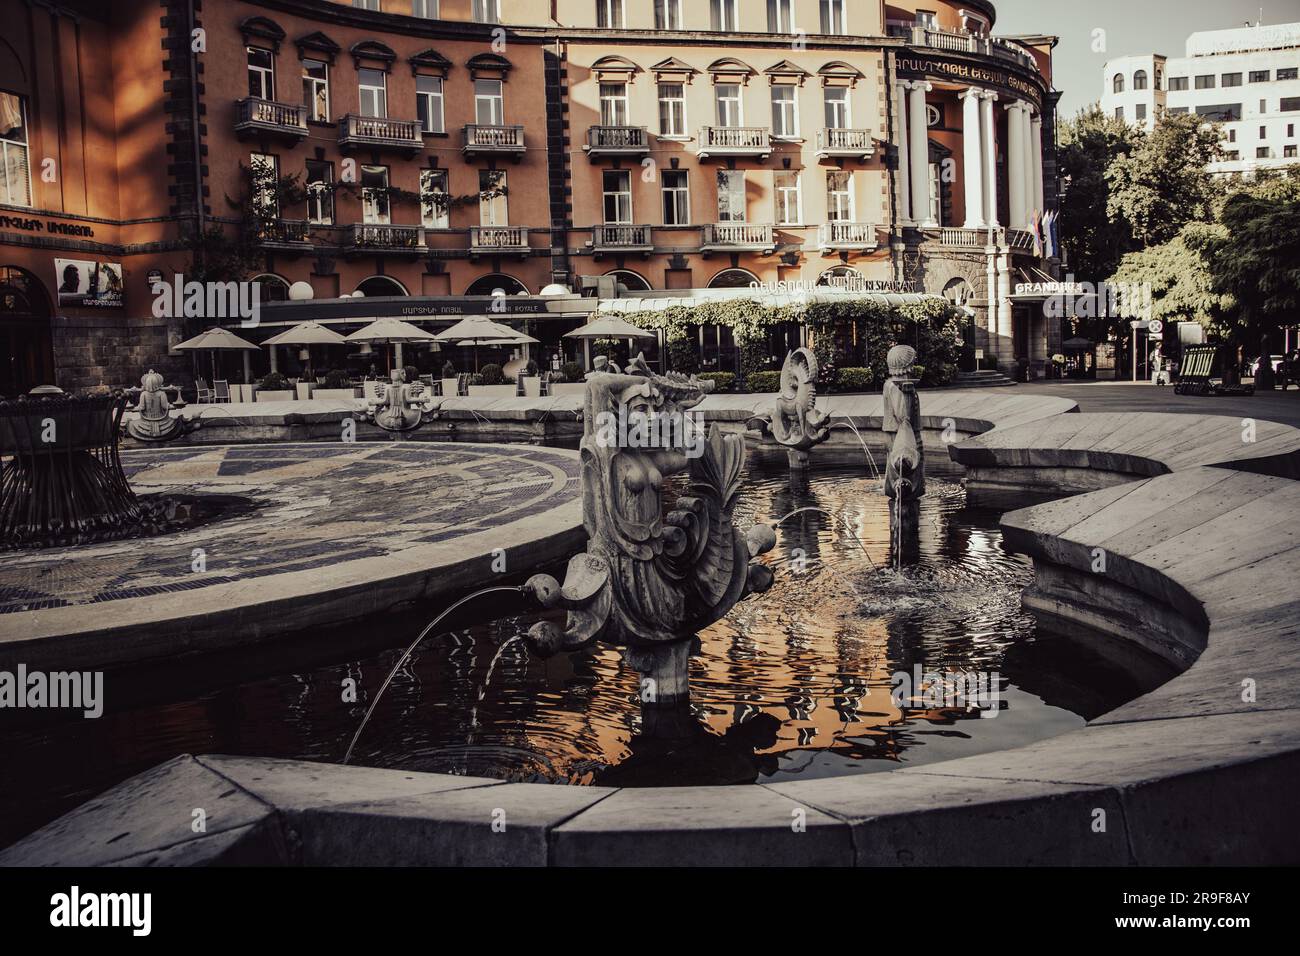 Old fountain with stone oriental statue of one of the streets of Yerevan. Stock Photo